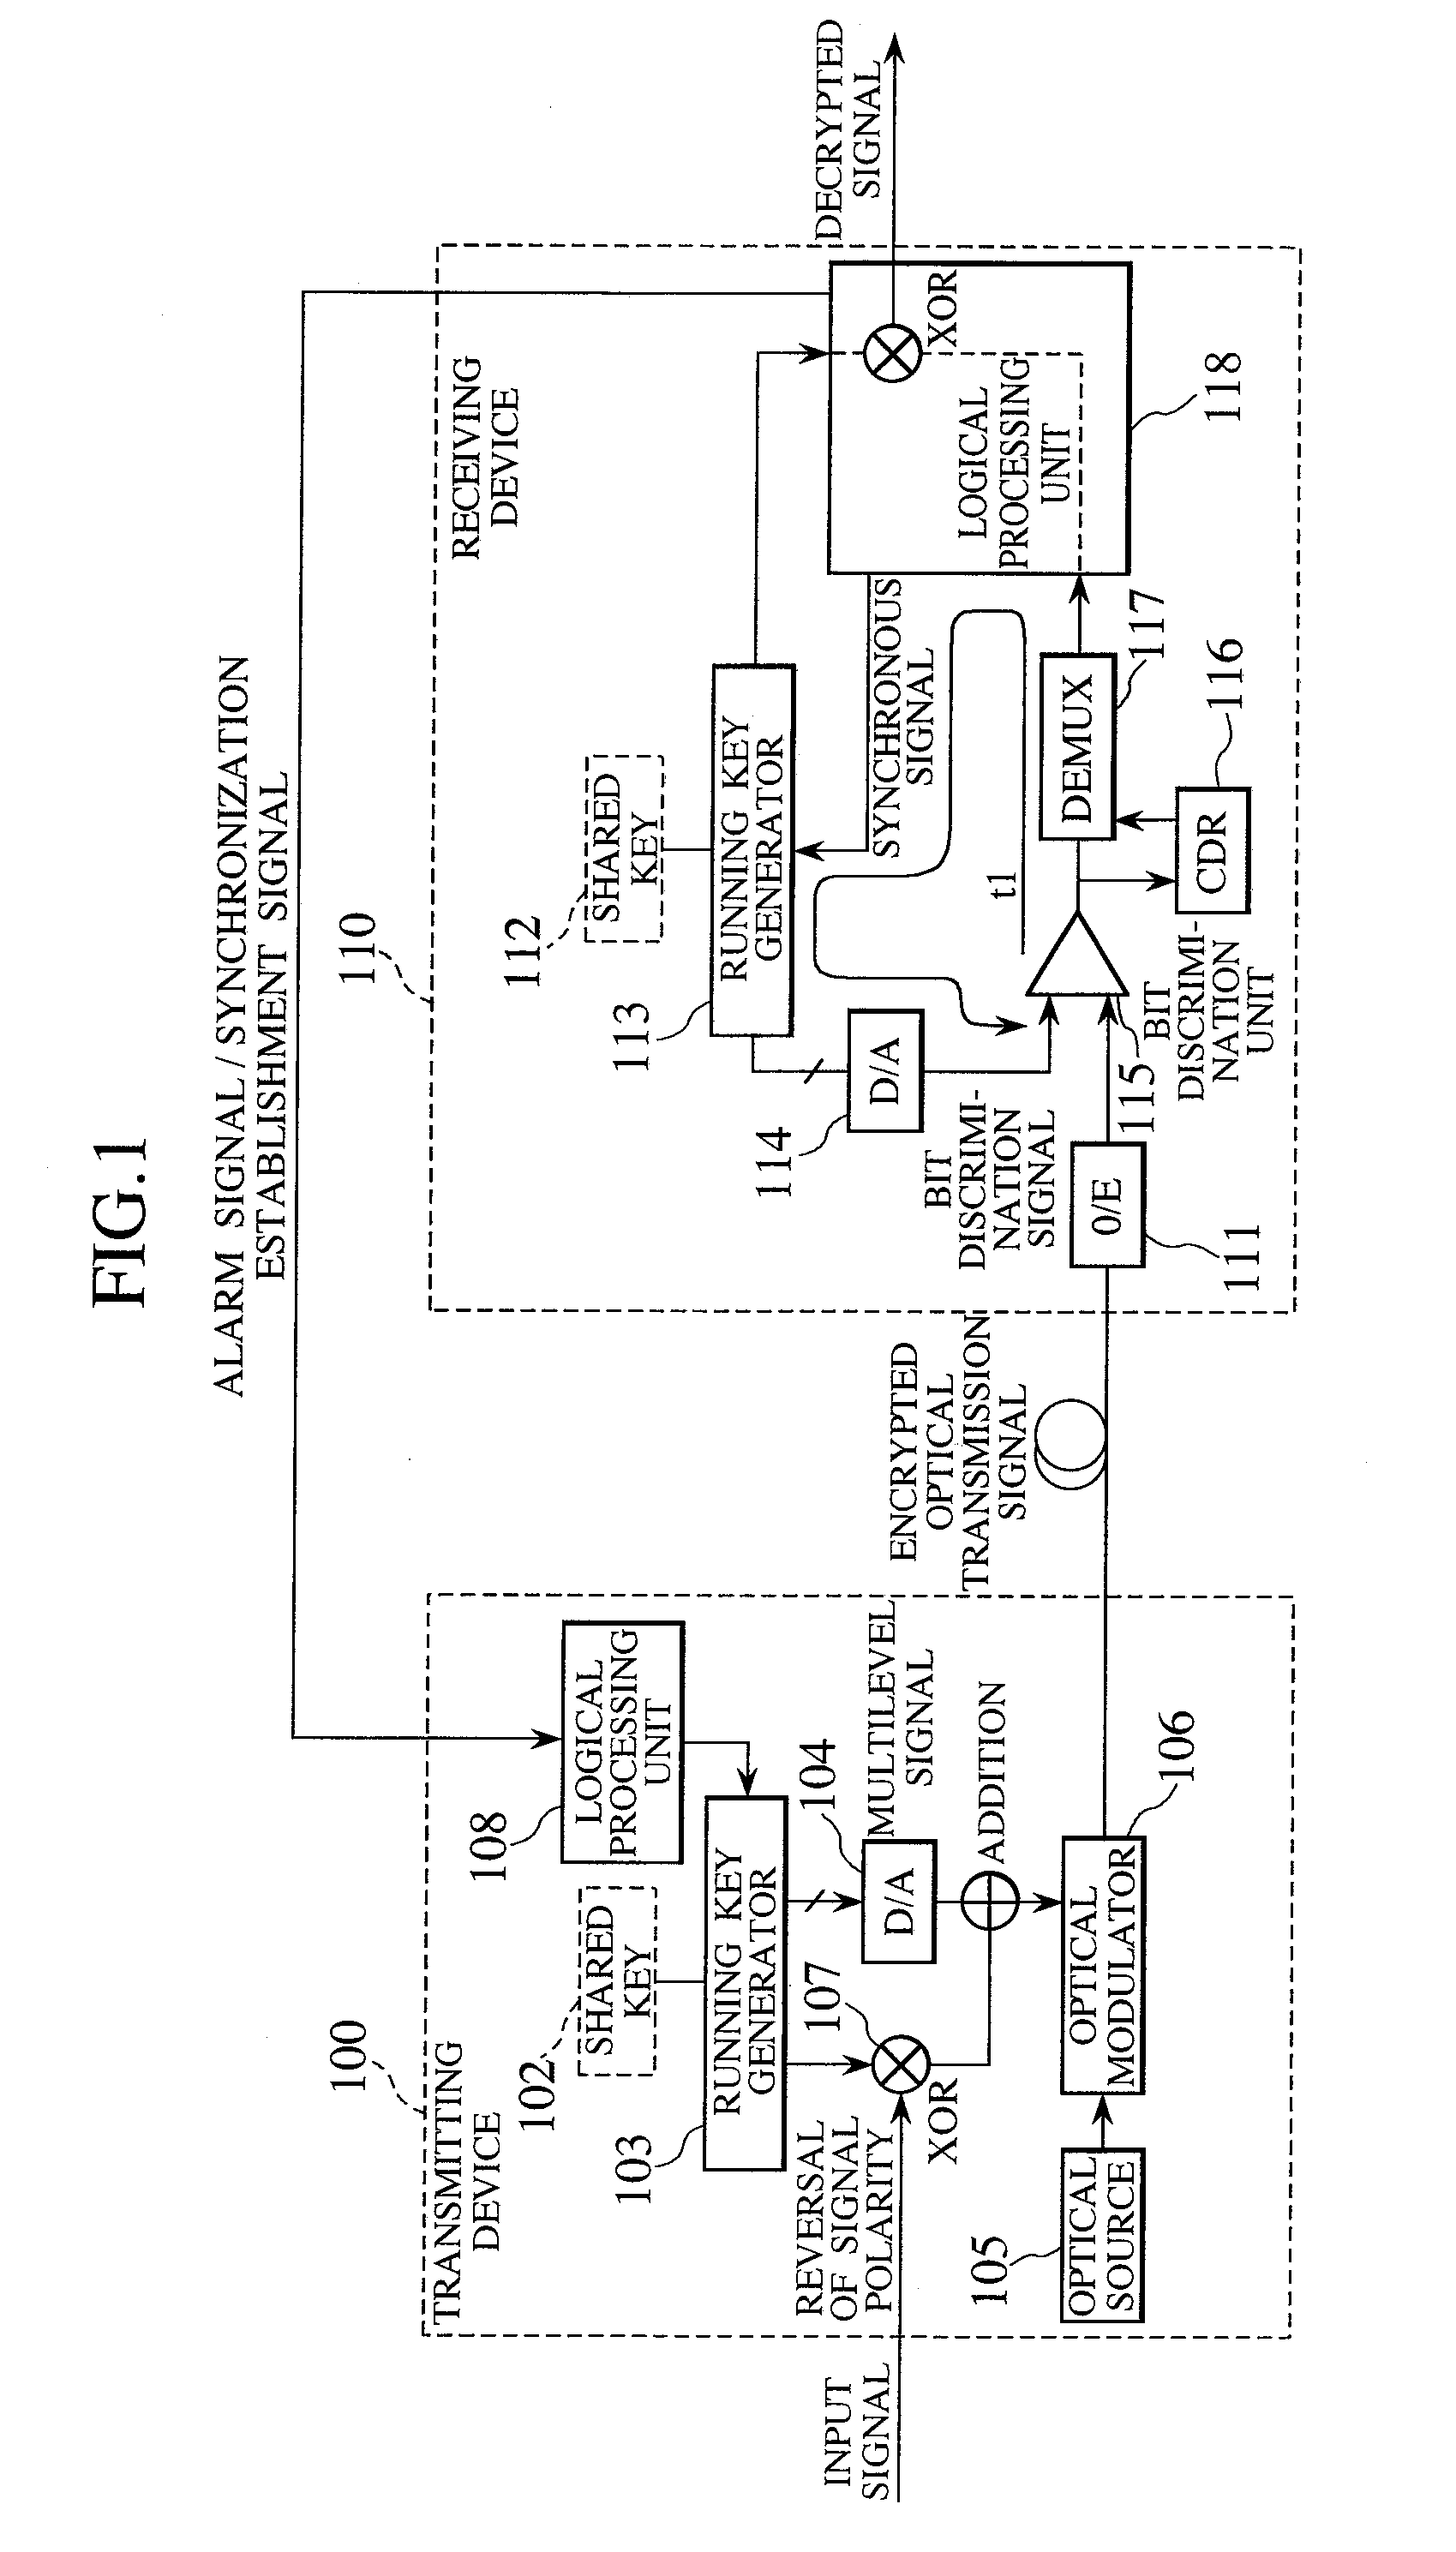 Method for synchronization in encrypted communications using shared key